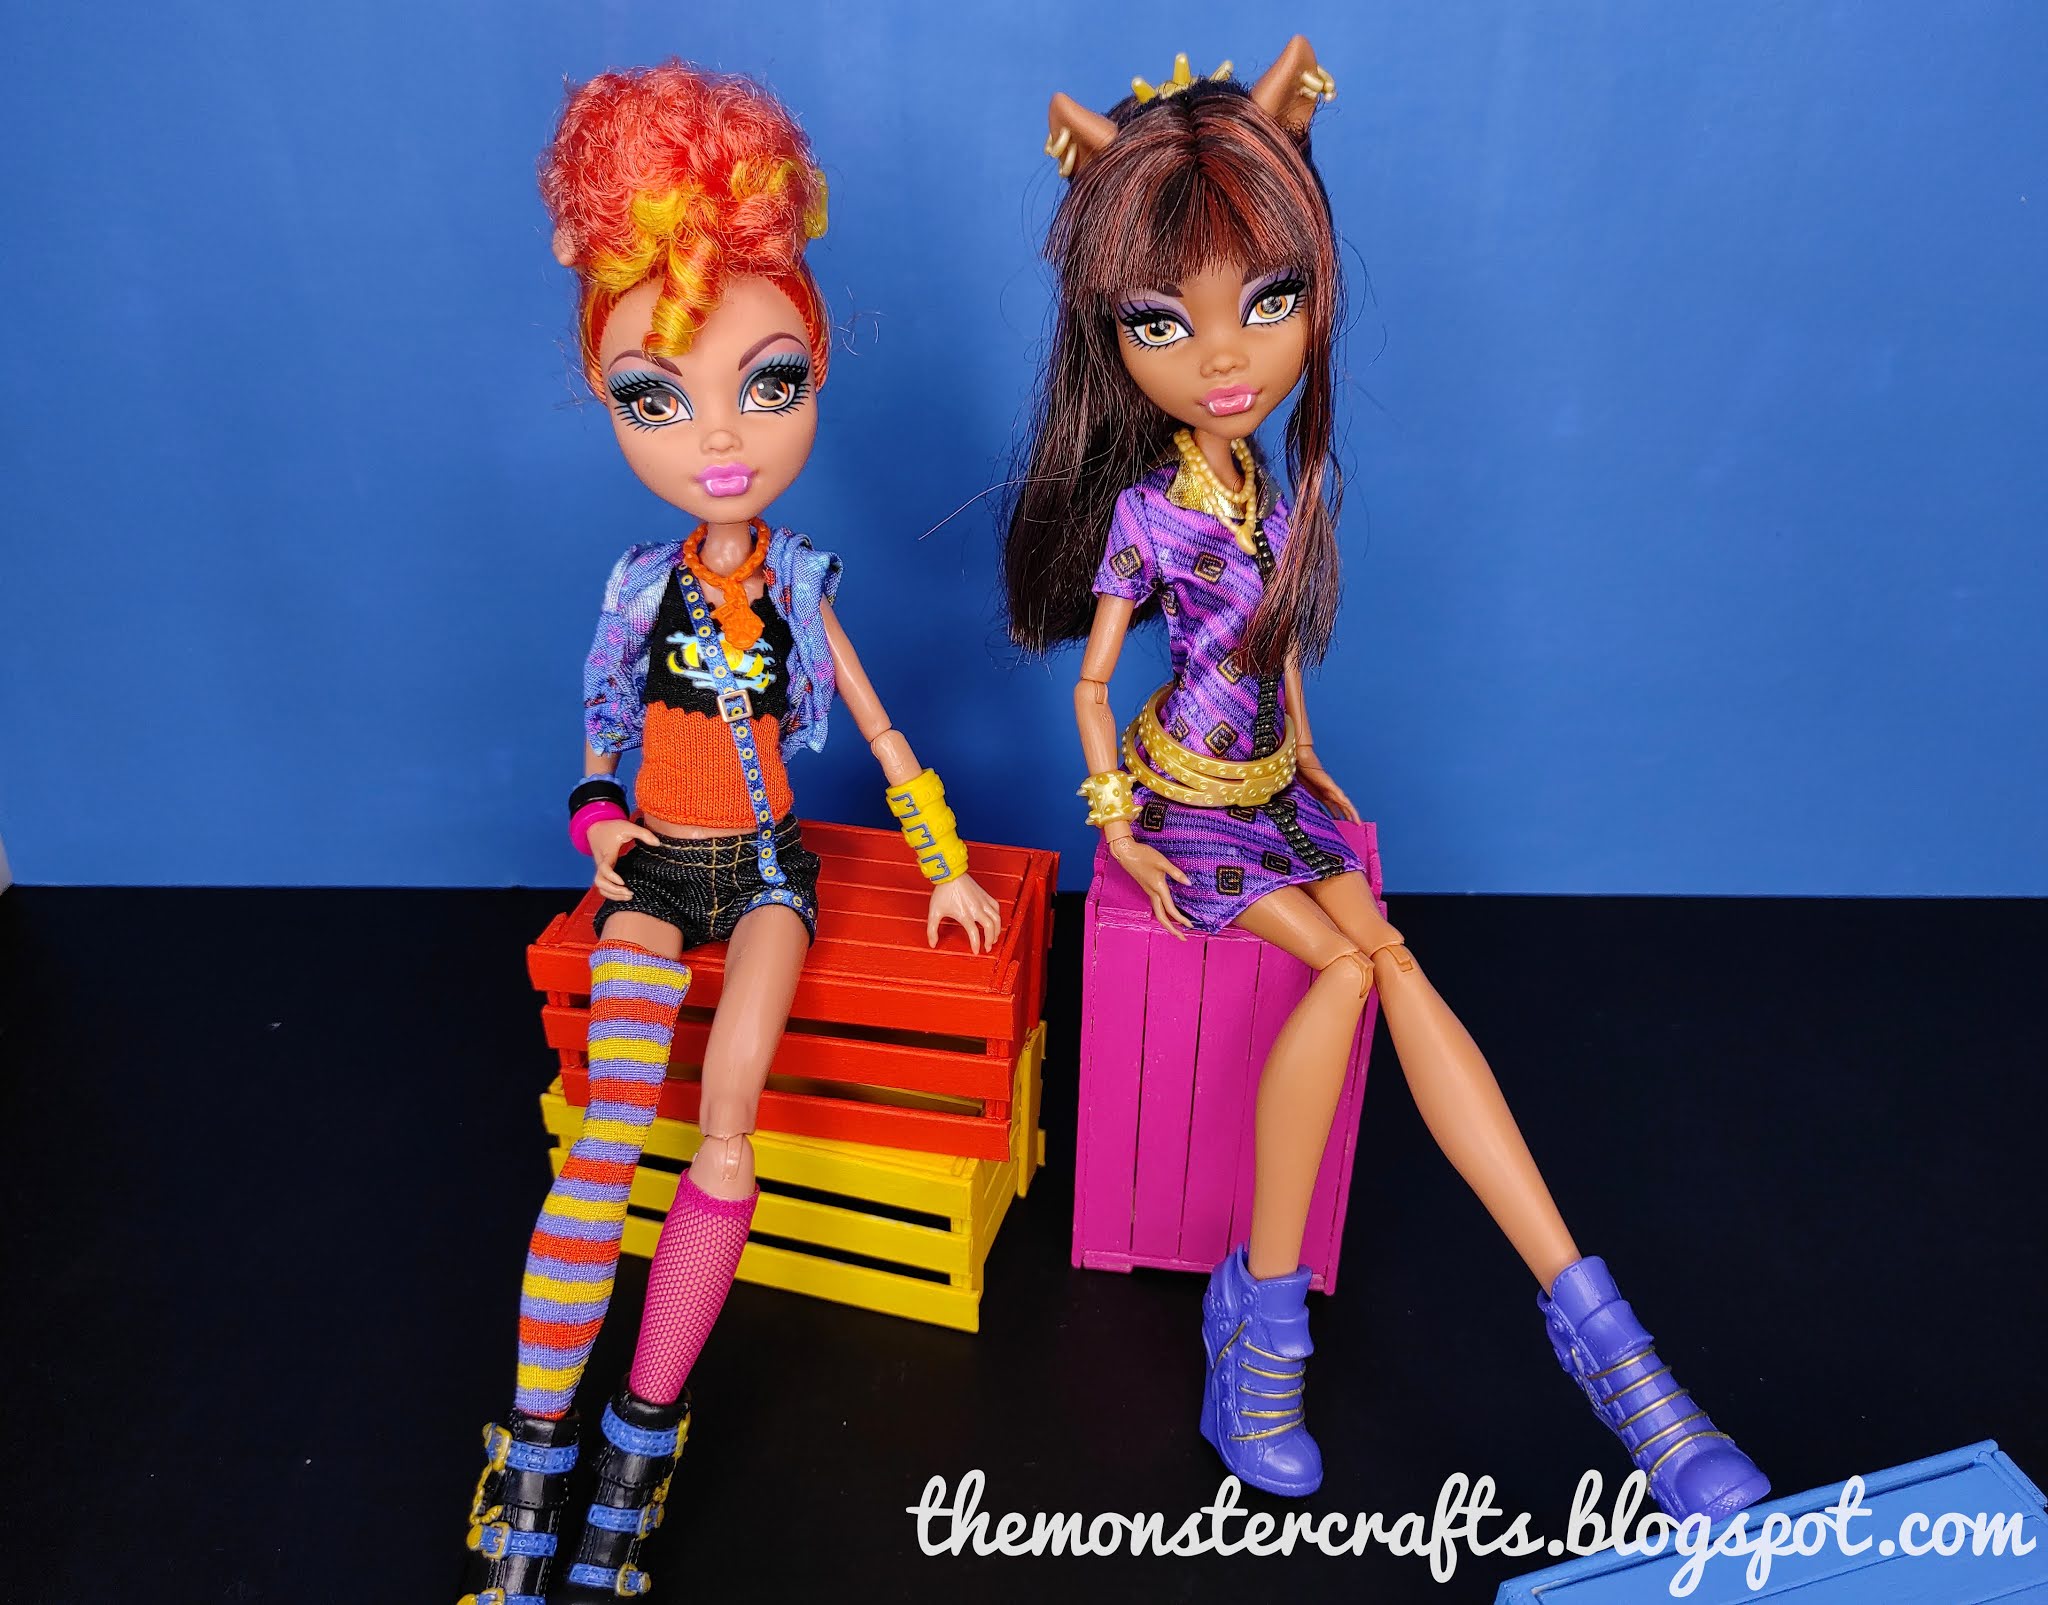 Lagoona Blue - Current  Monster high characters, Monster high